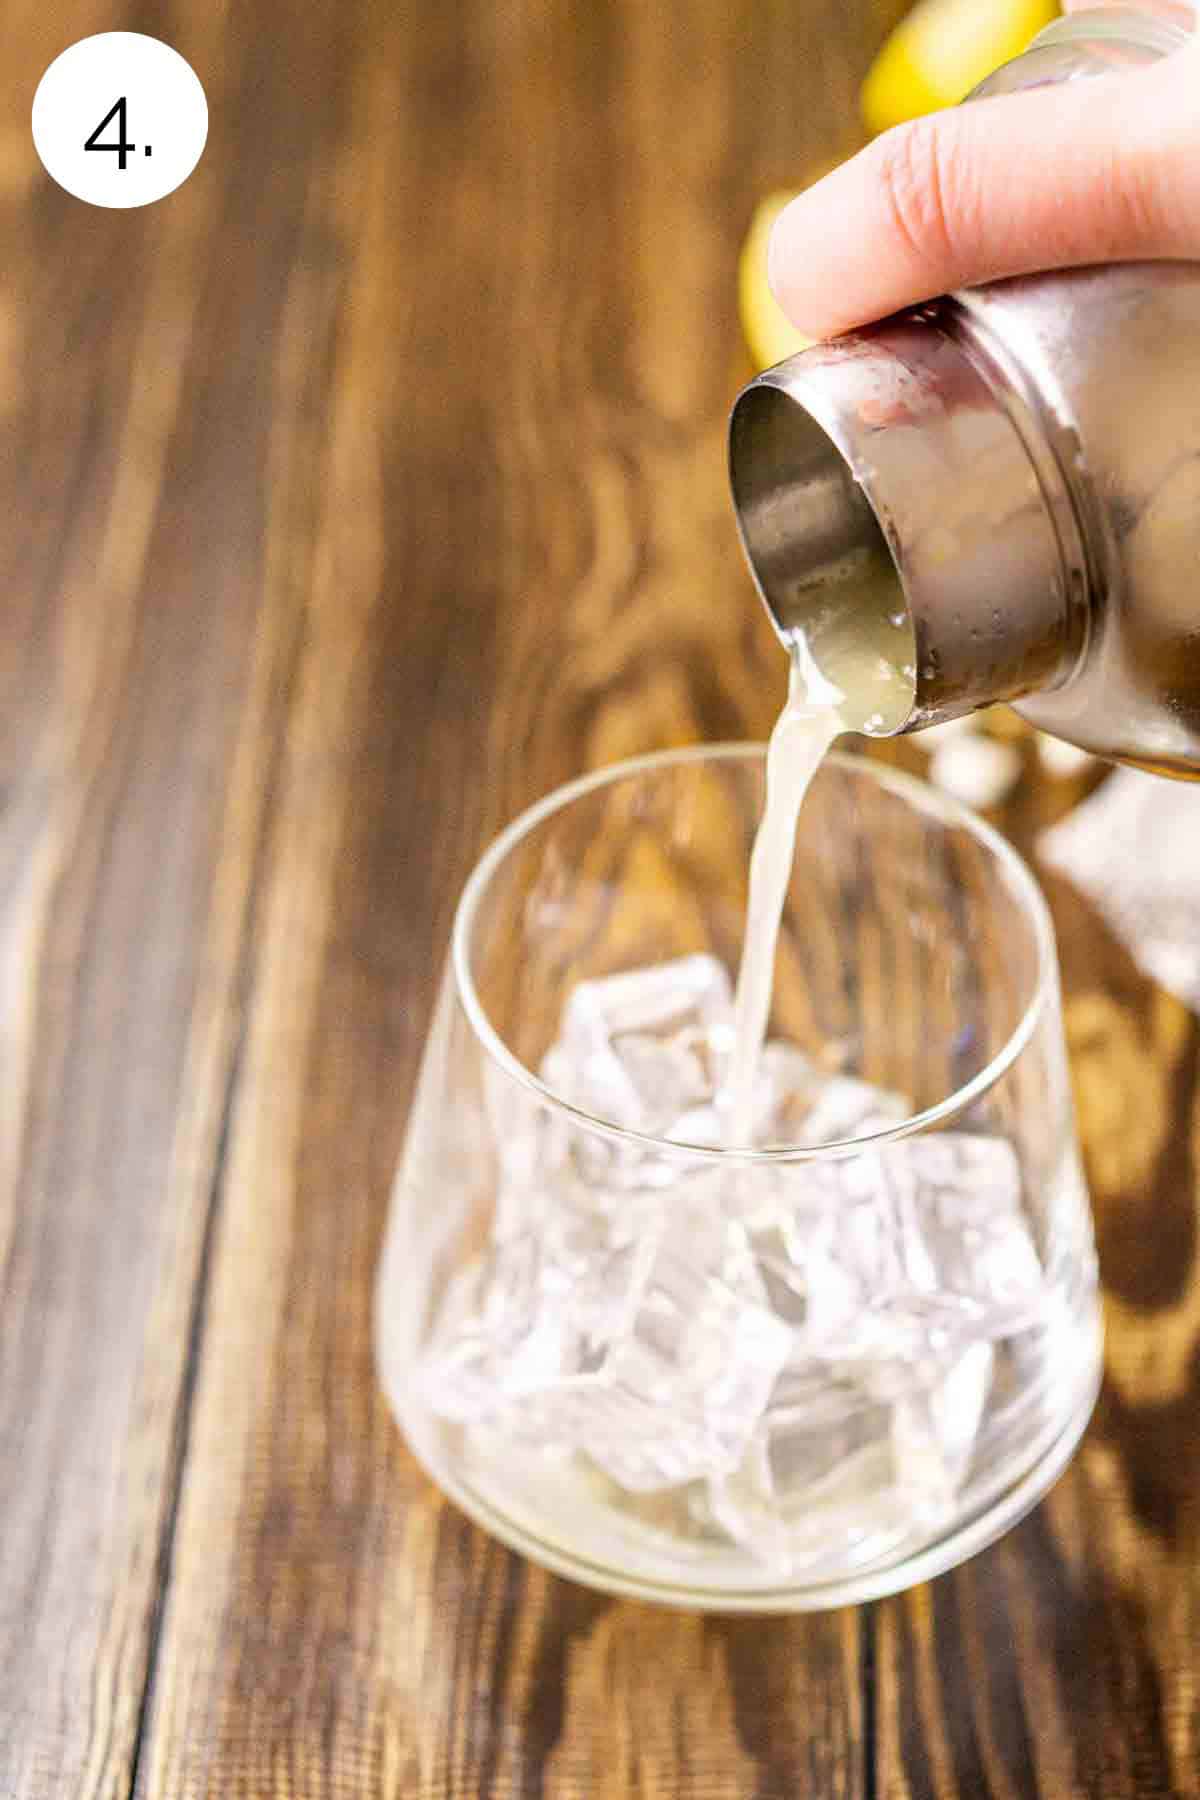 A hand holding a cocktail shaker as it strains the drink into a rocks glass filled with ice on a brown wooden surface.